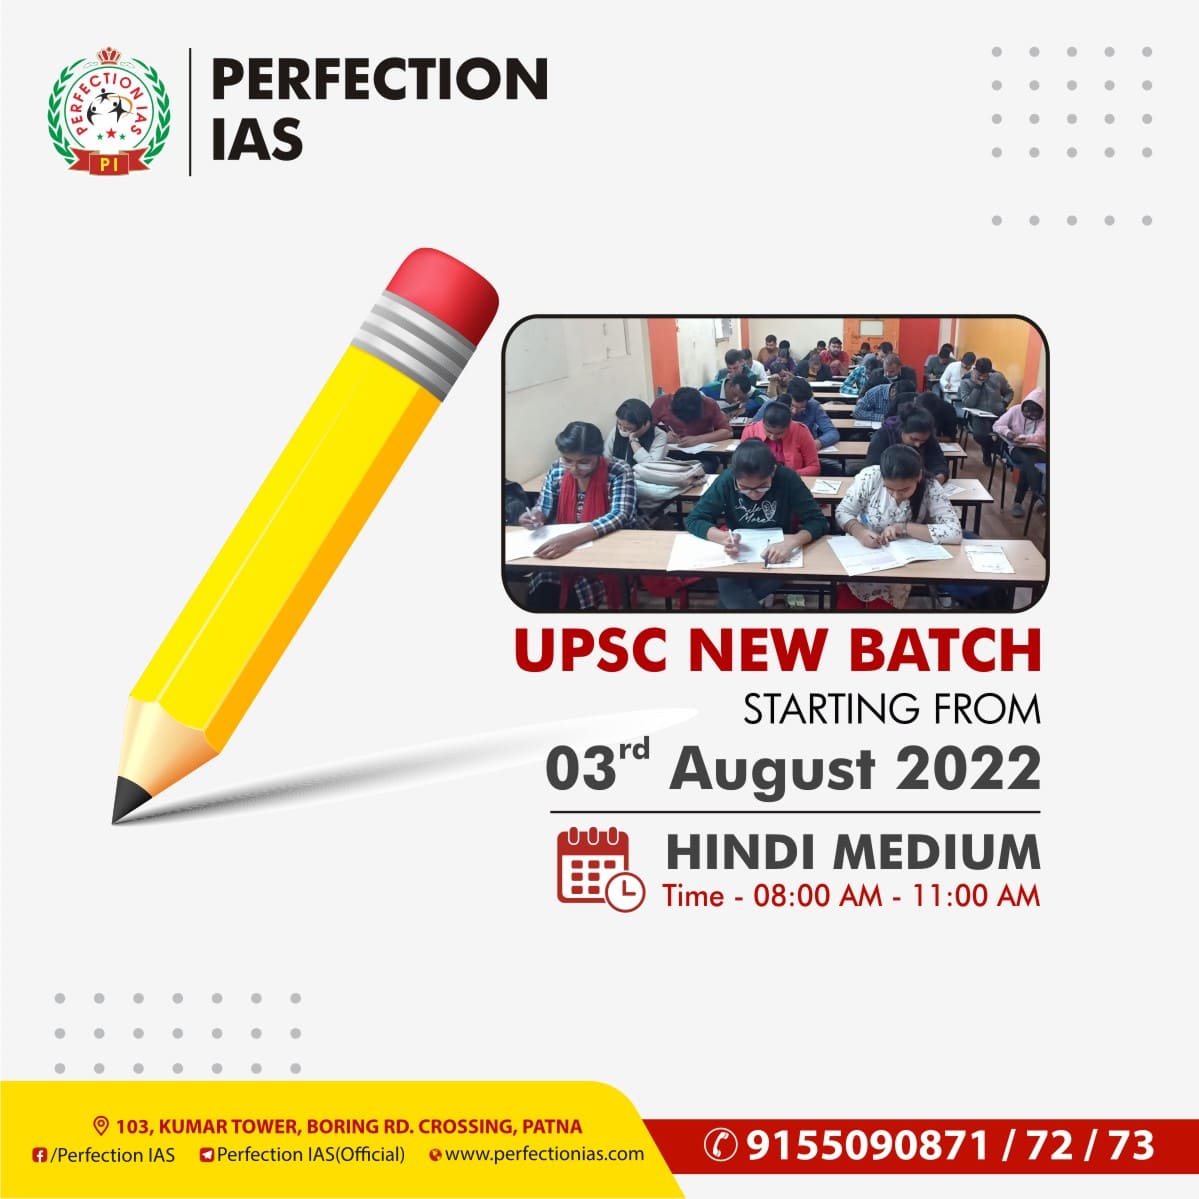 New Batches For UPSC Starting From 03rd Aug 2022